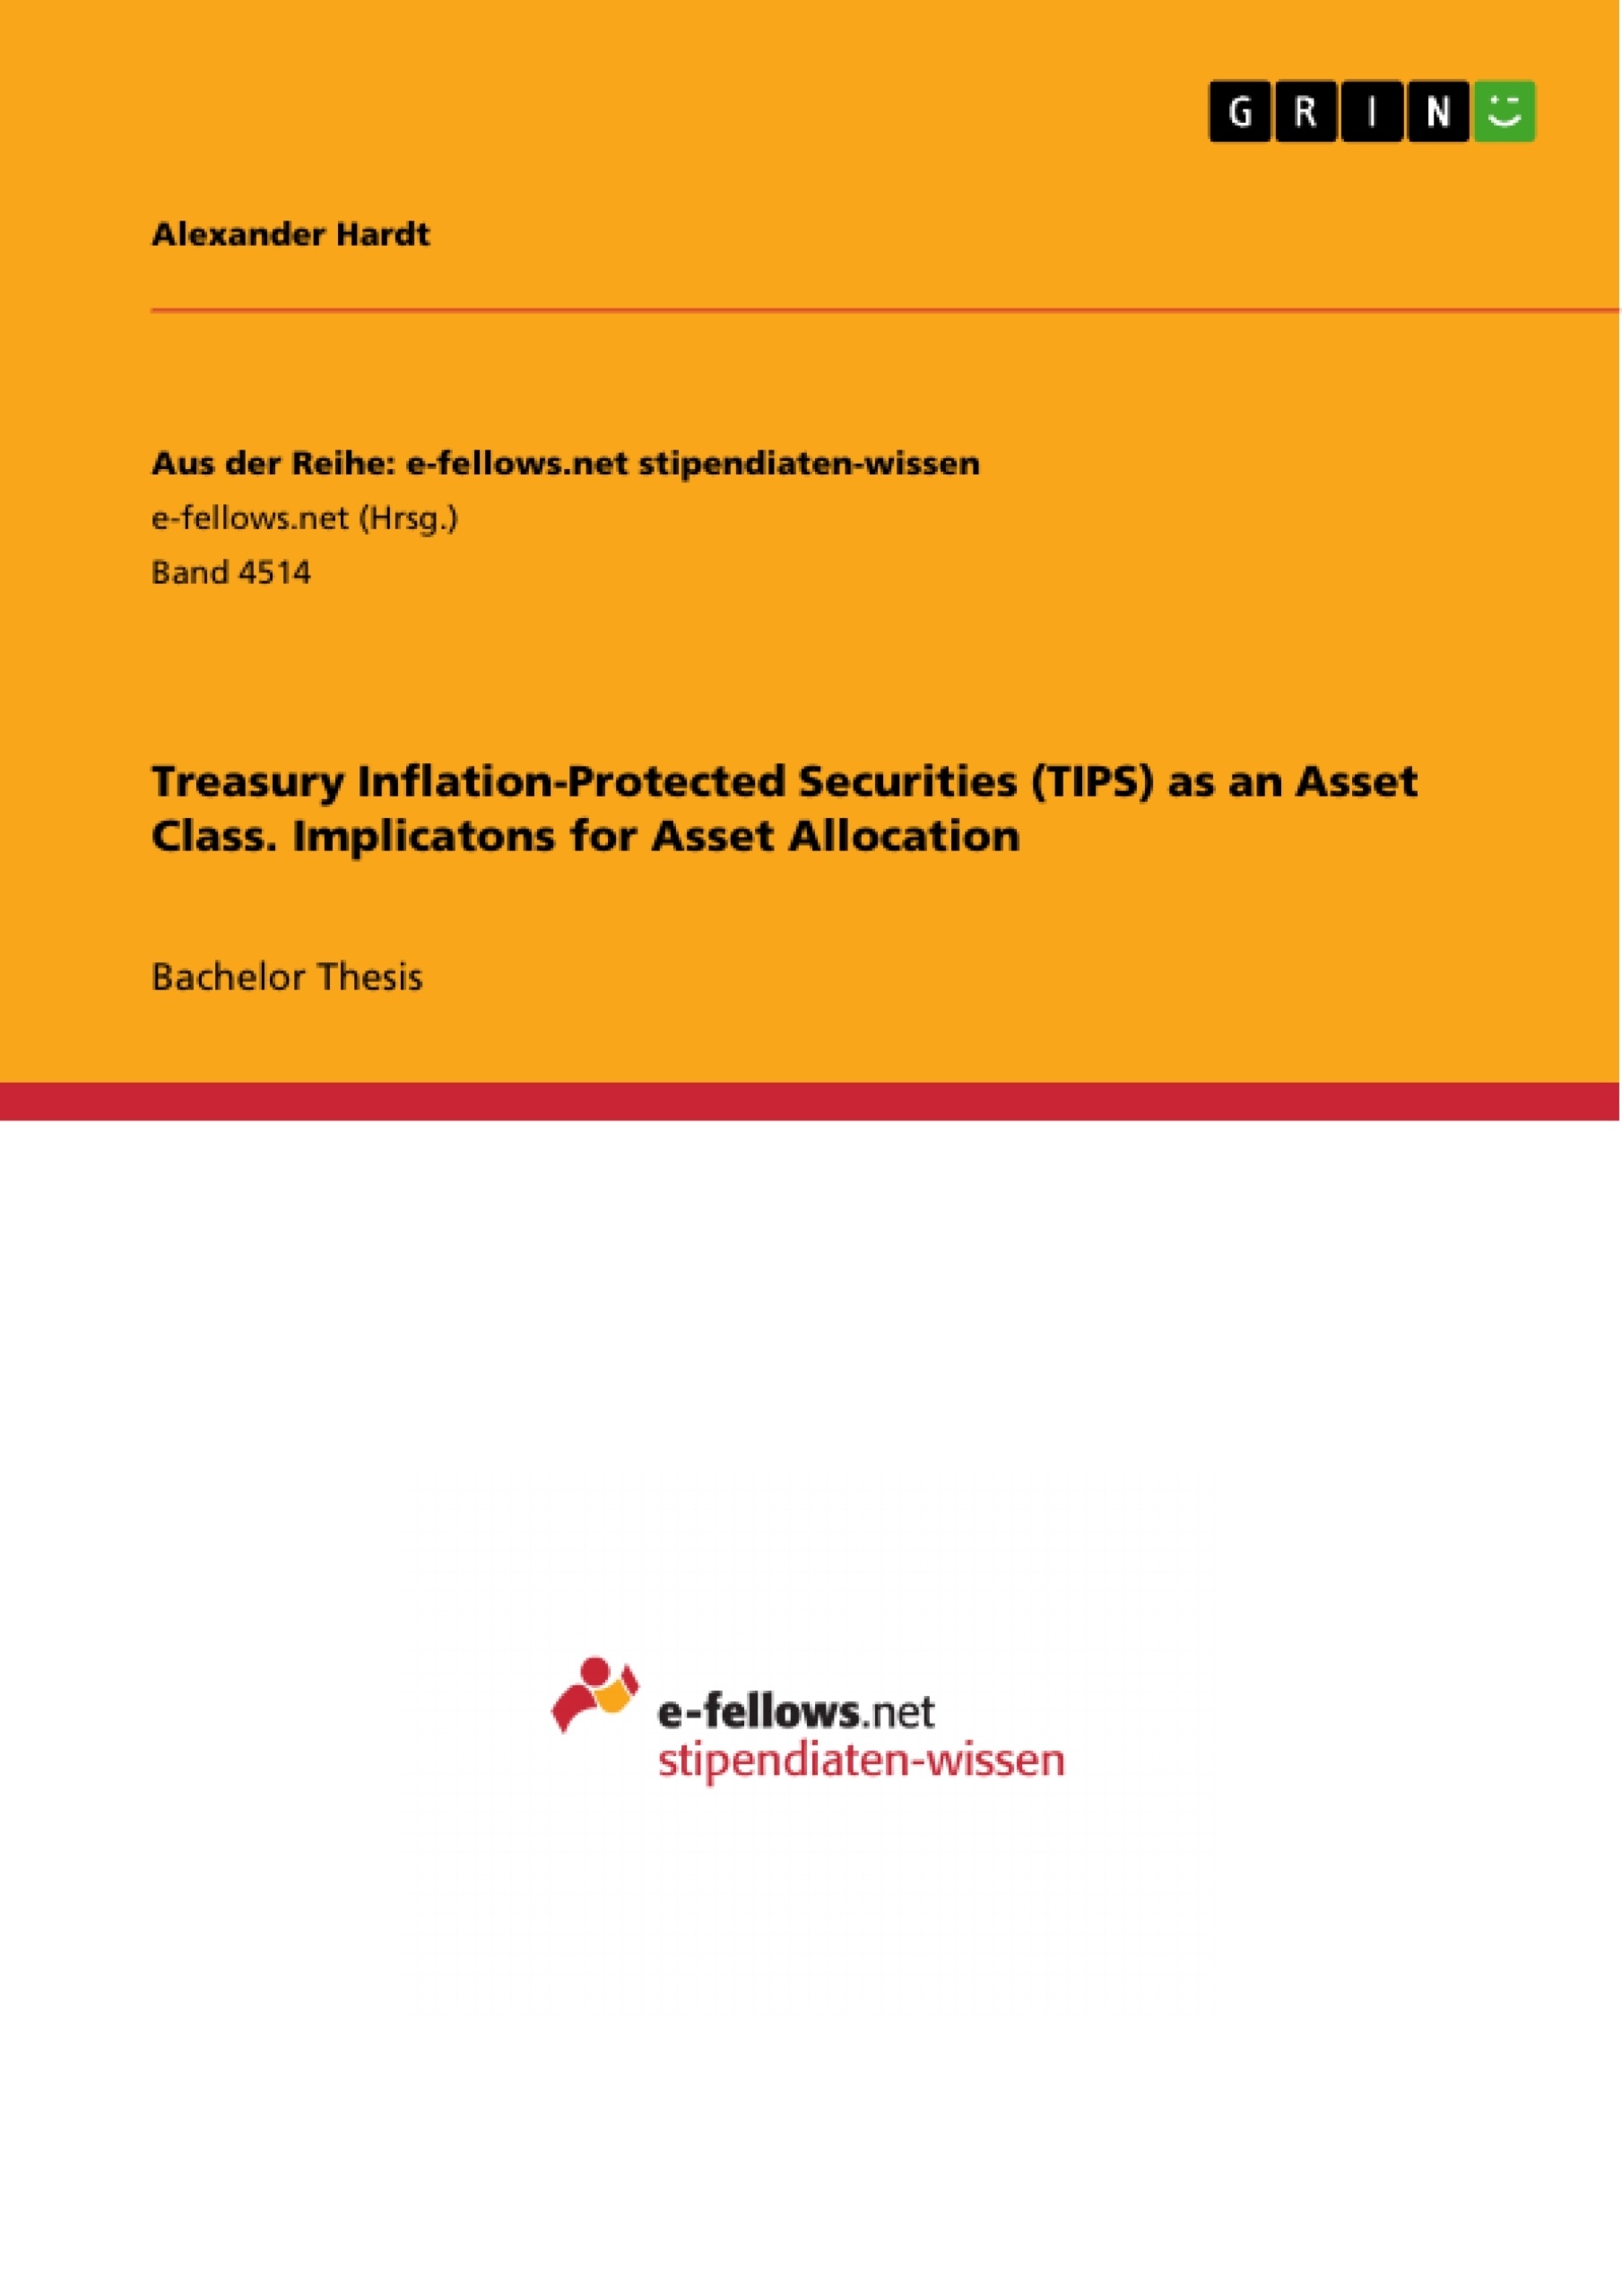 Title: Treasury Inflation-Protected Securities (TIPS) as an Asset Class. Implicatons for Asset Allocation